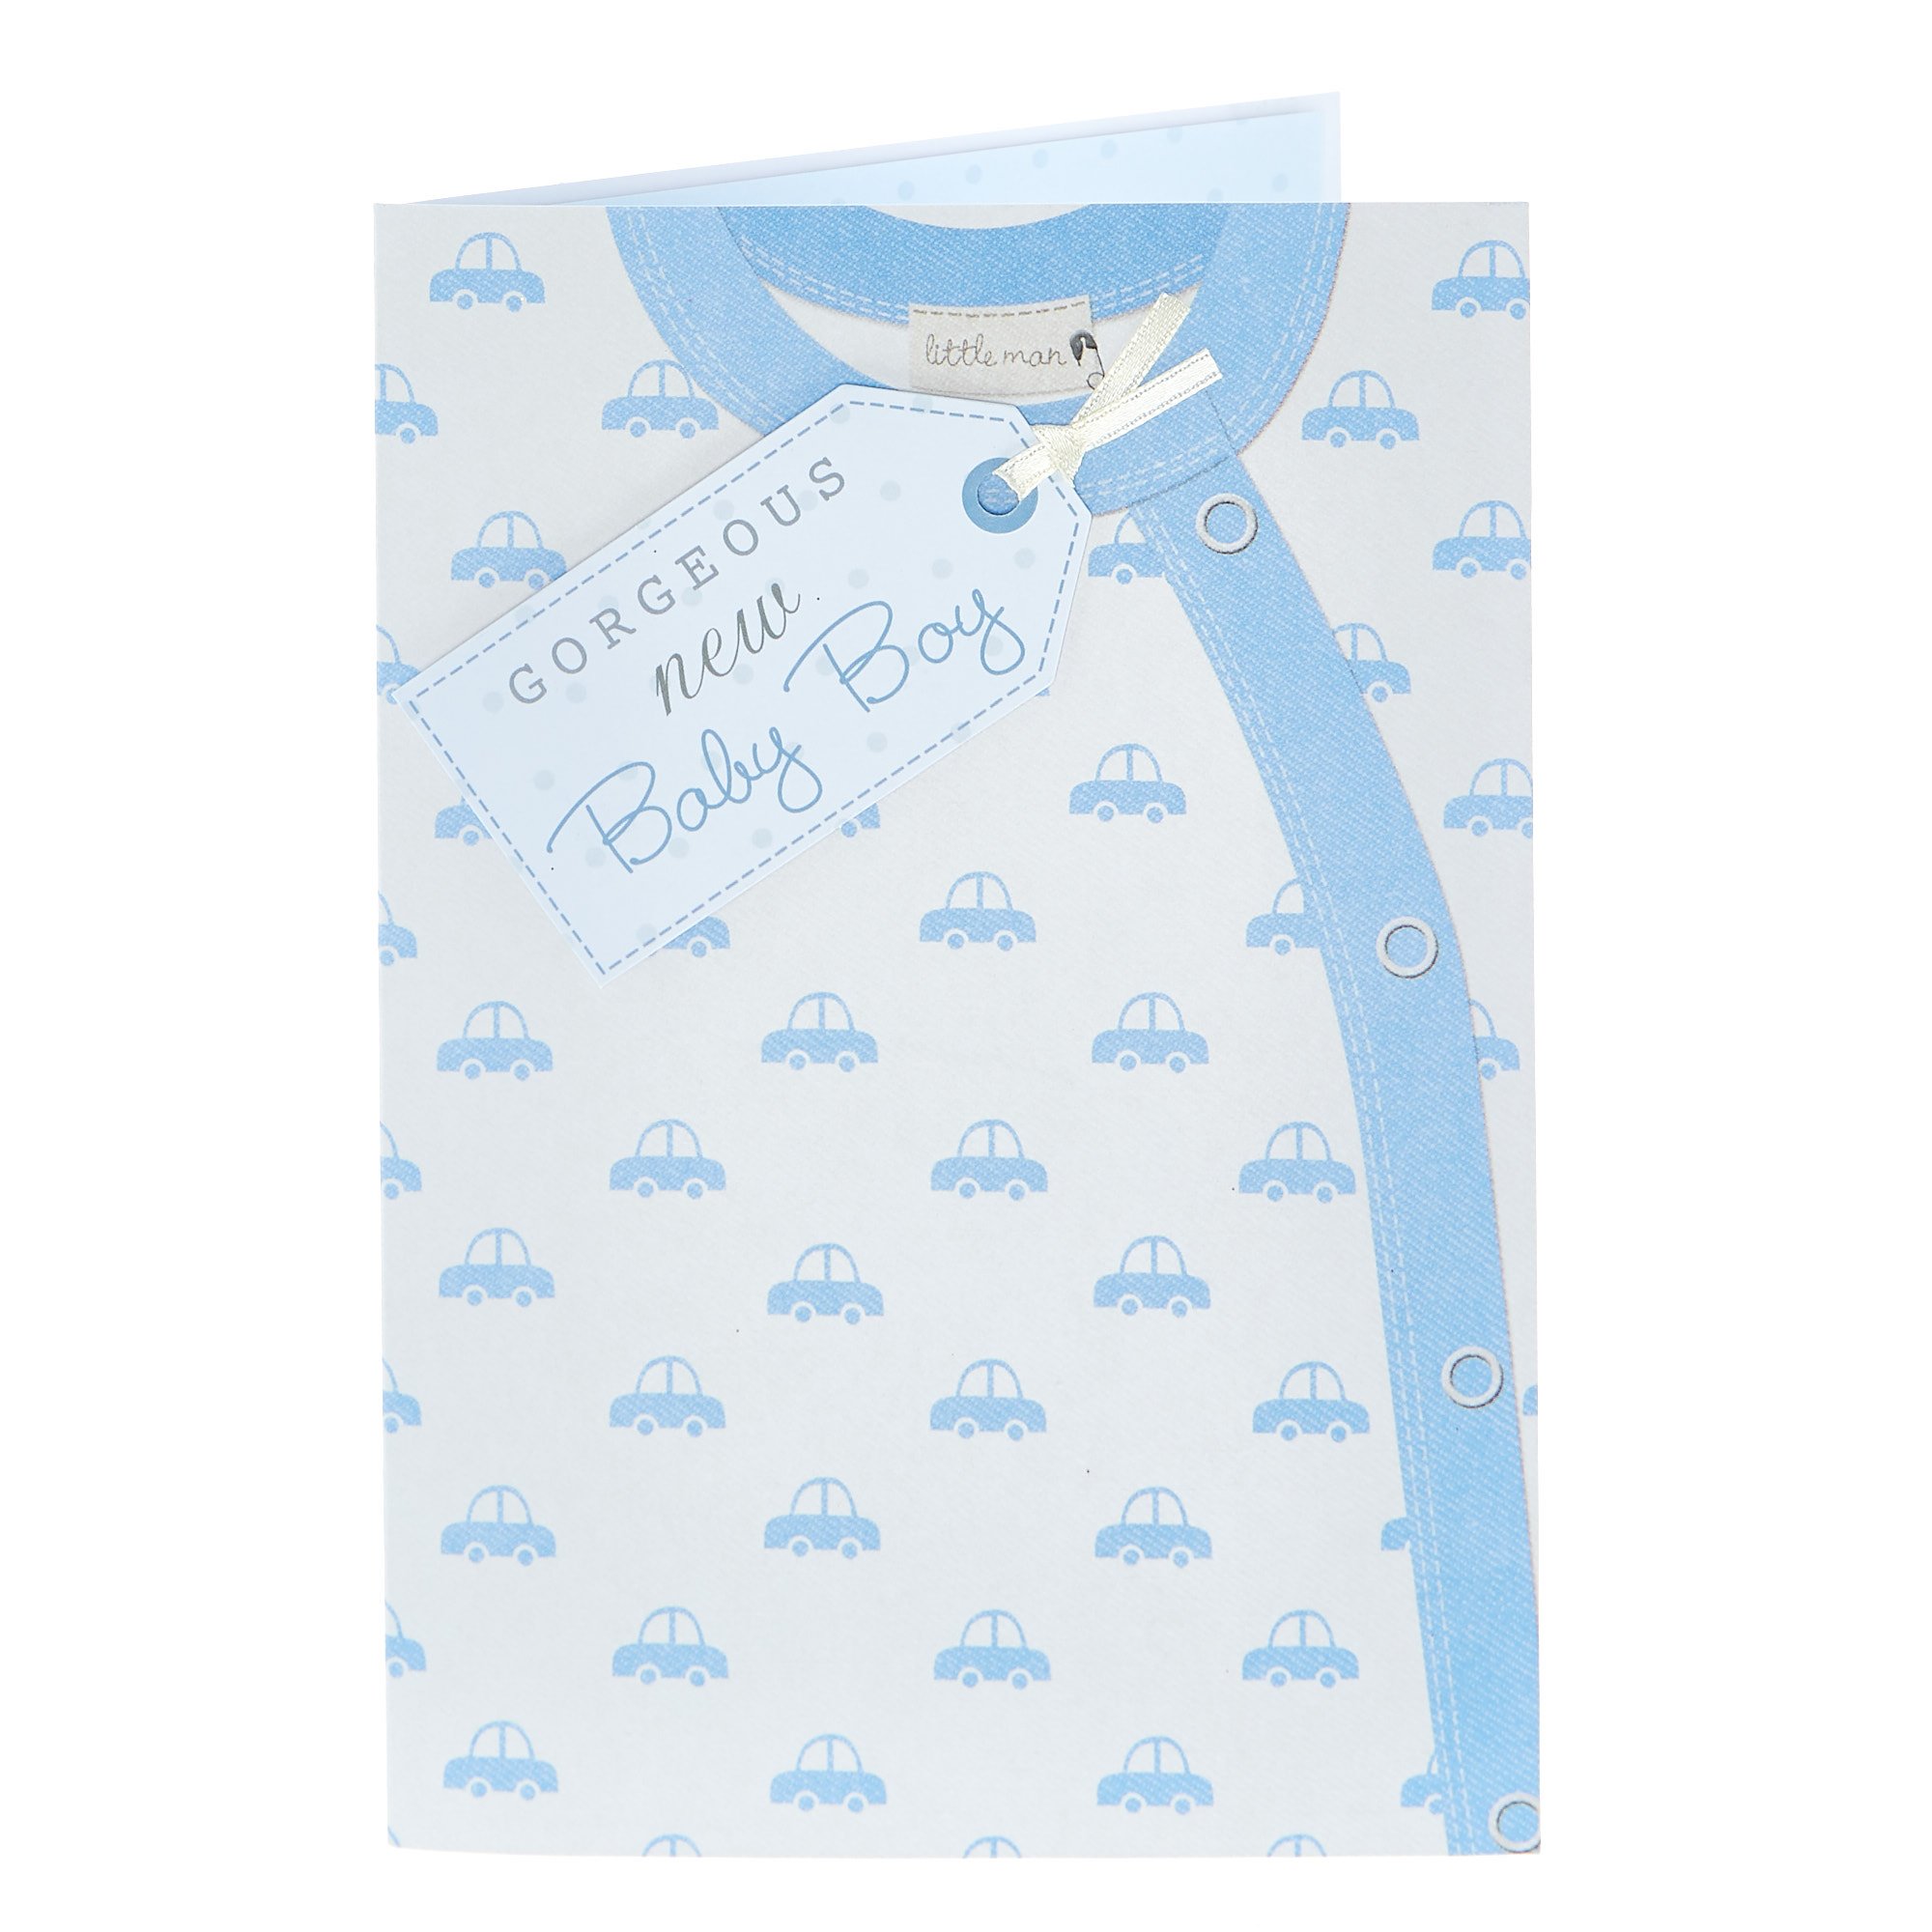 New Baby Card - Gorgeous Baby Boy